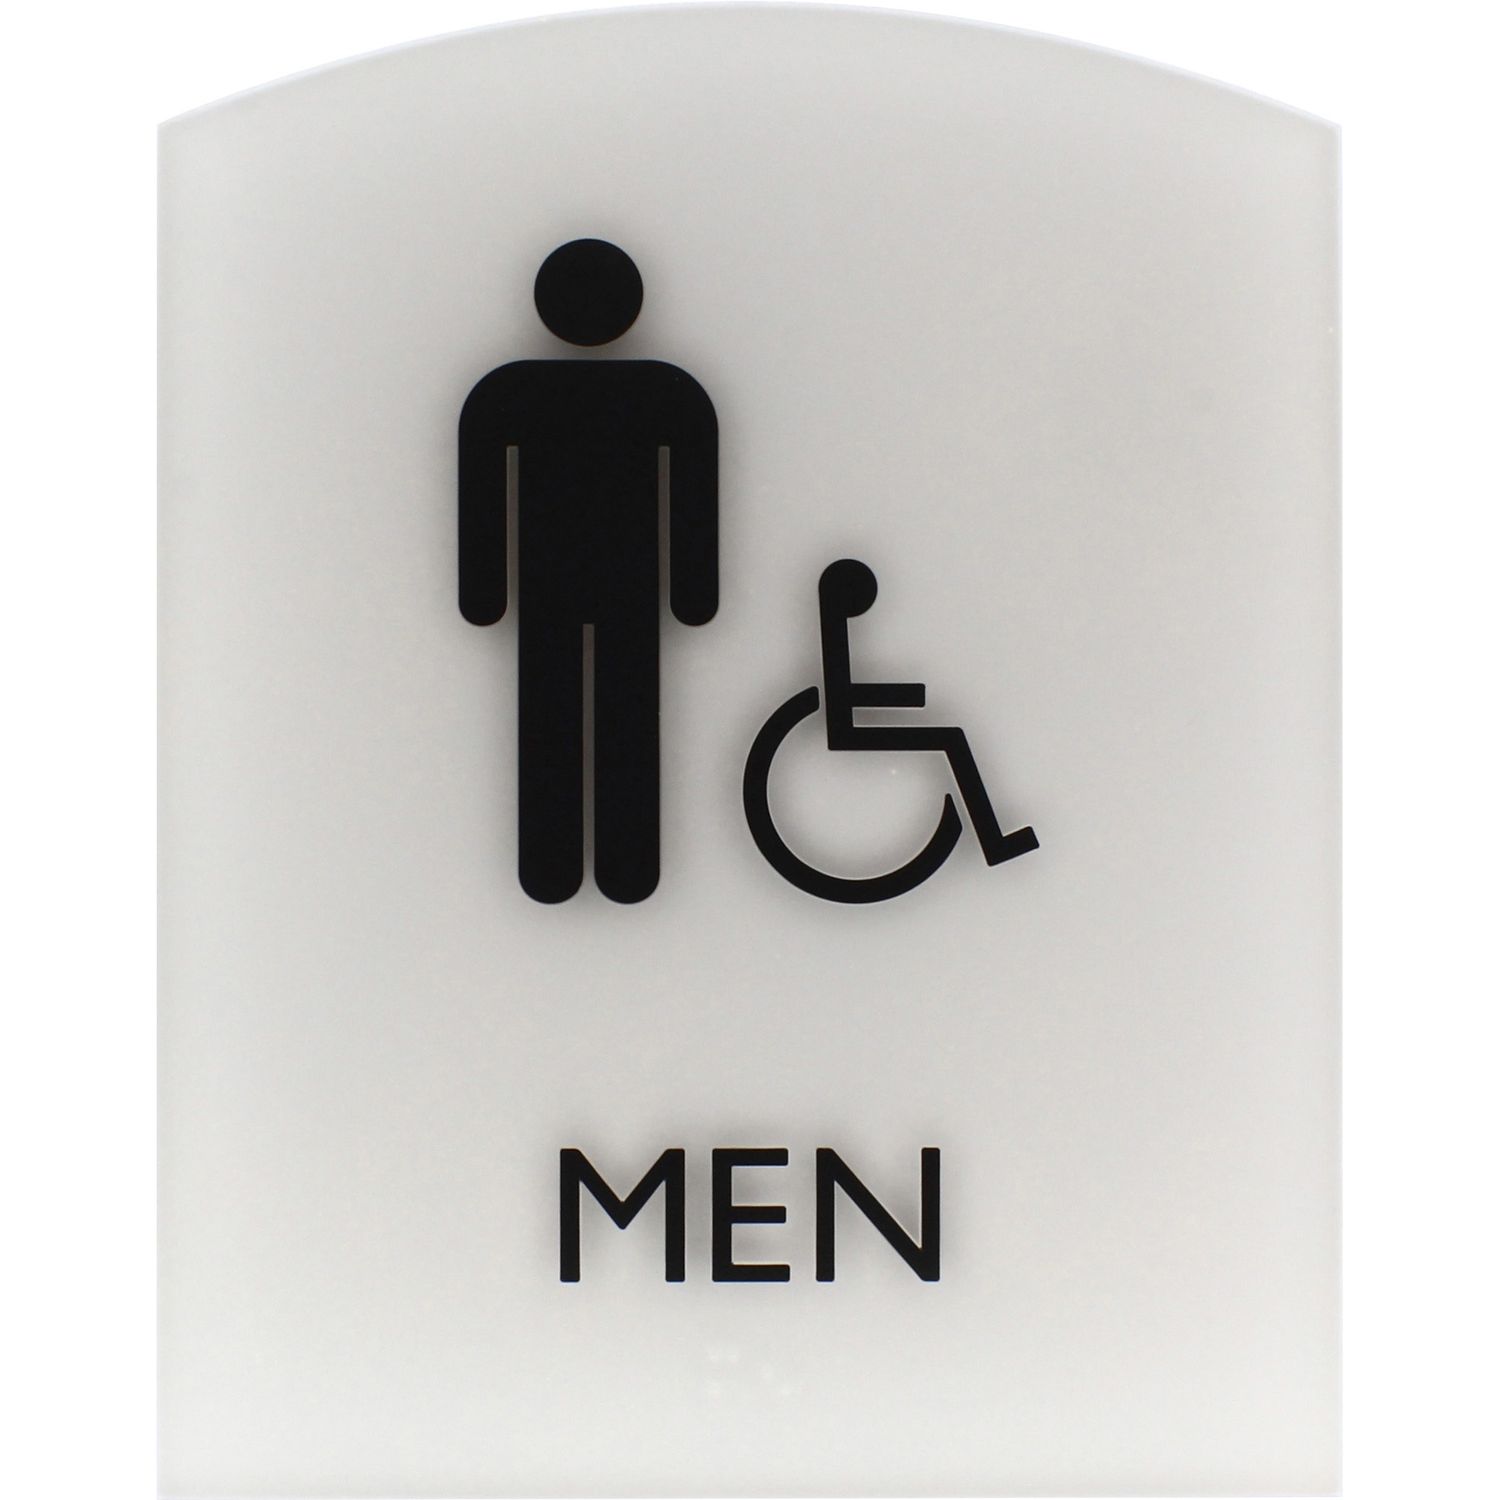 Restroom Sign 1 Each, Men Print/Message, 6.8" Width x 8.5" Height, Easy Readability, Braille, Light Gray